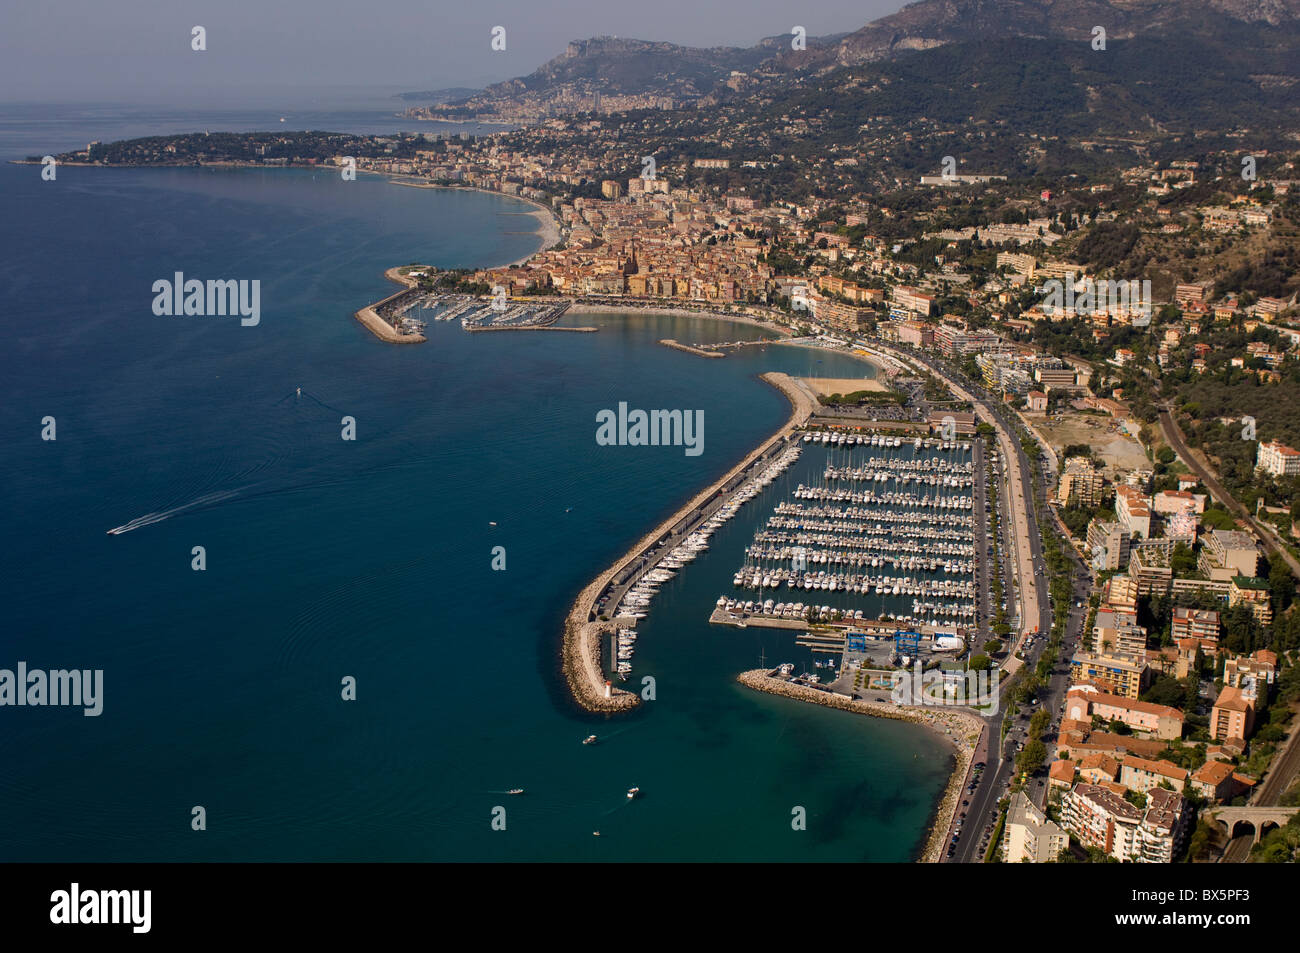 View from helicopter of Menton, Alpes-Maritimes, Provence, Cote d'Azur, French Riviera, France, Mediterranean, Europe Stock Photo